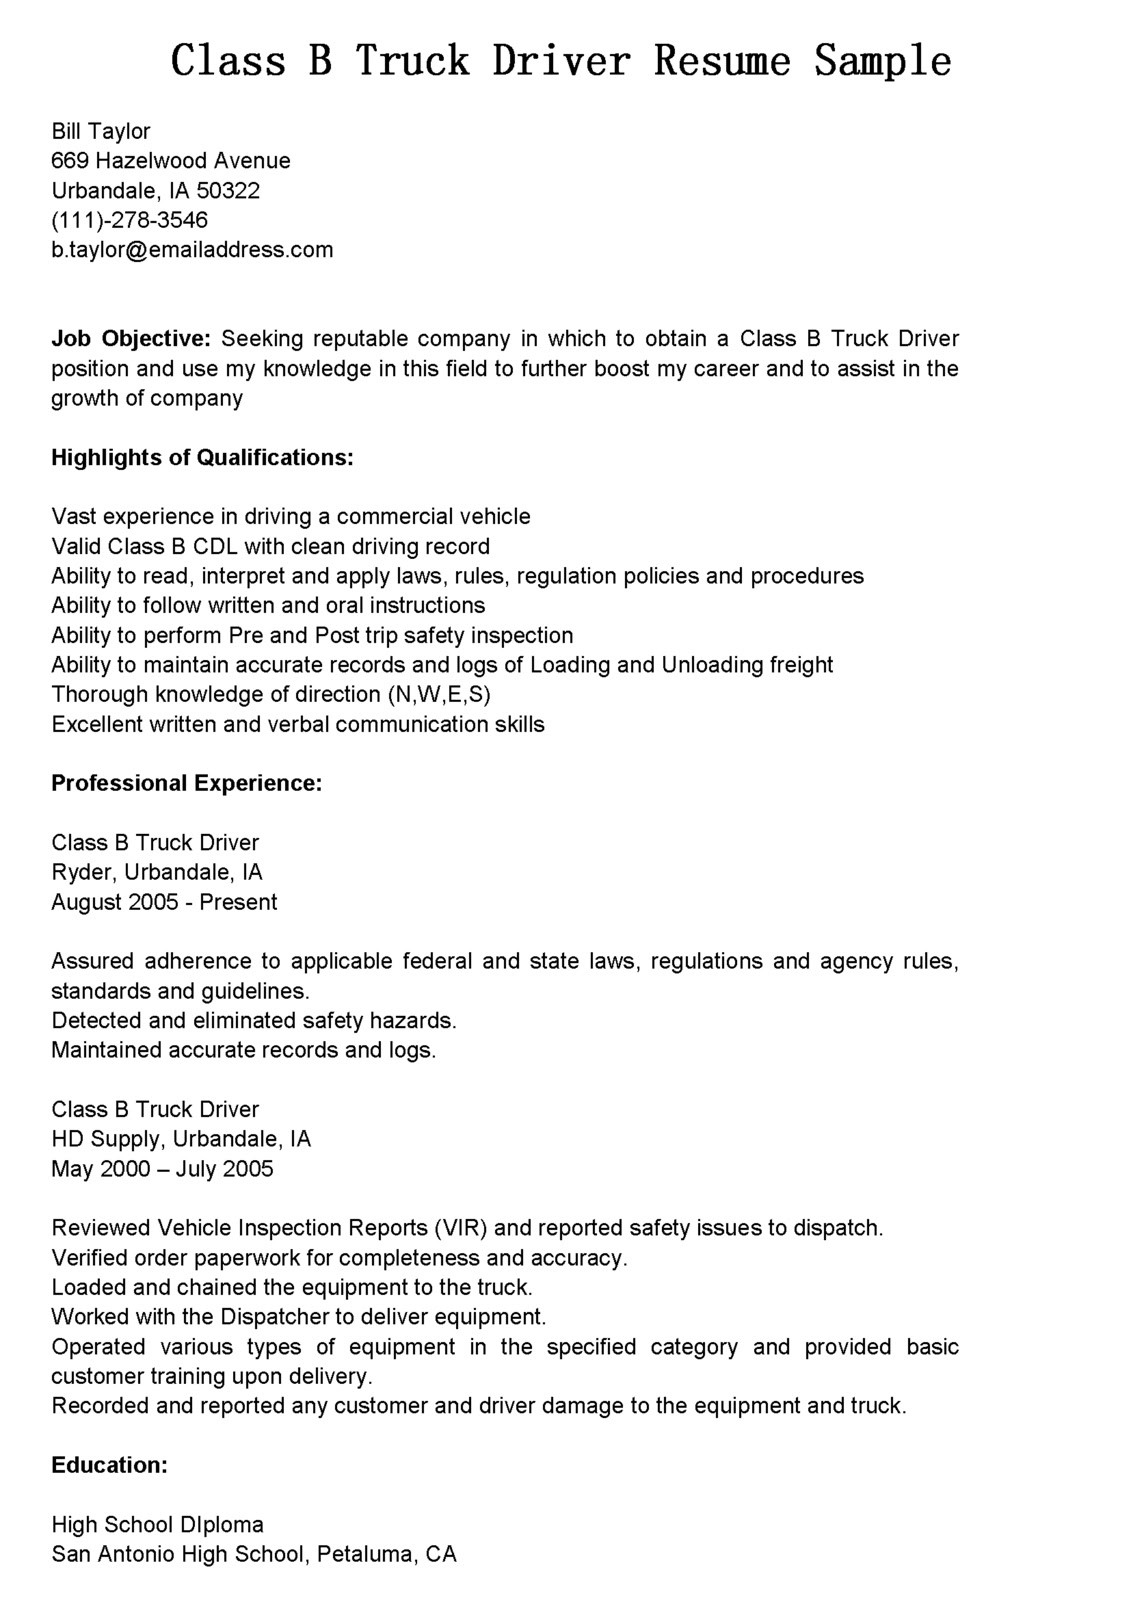 Sample Resume for Truck Driver with No Experience Driver Resumes: Class B Truck Driver Resume Sample